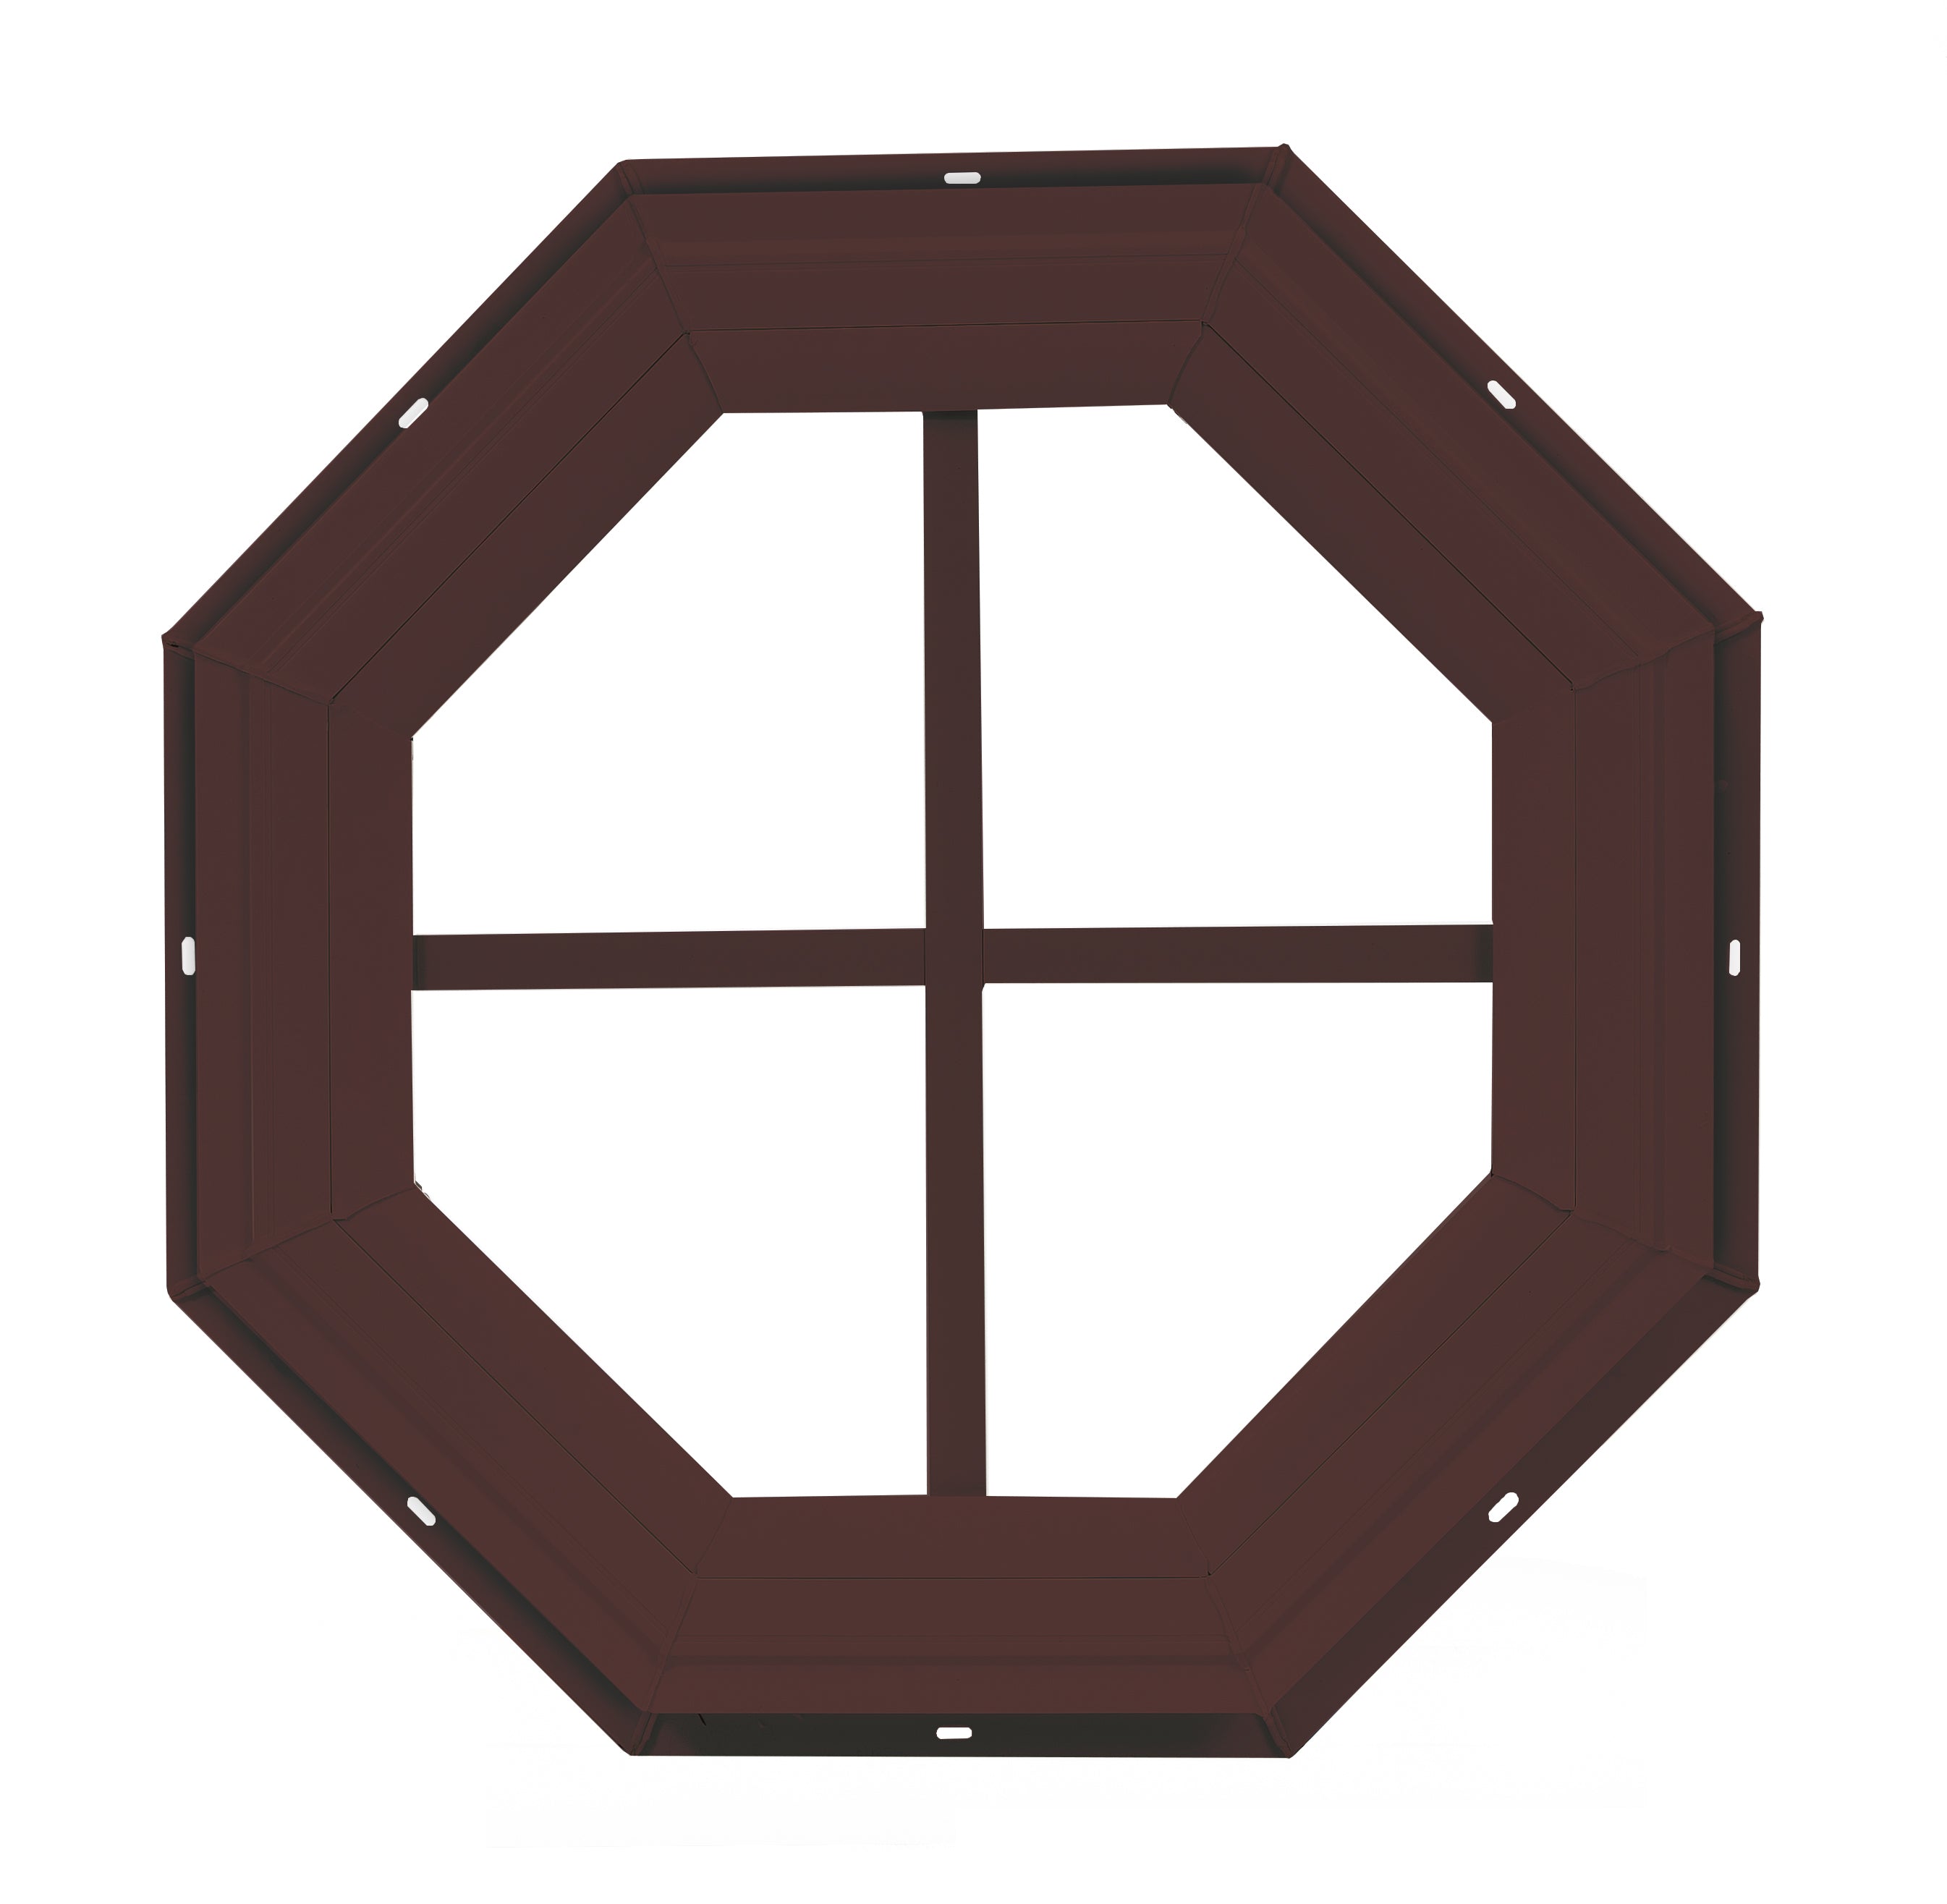 18" Octagon Gable J-Lap Mount PVC Brown Window with Grids for Sheds, Playhouses, and MORE